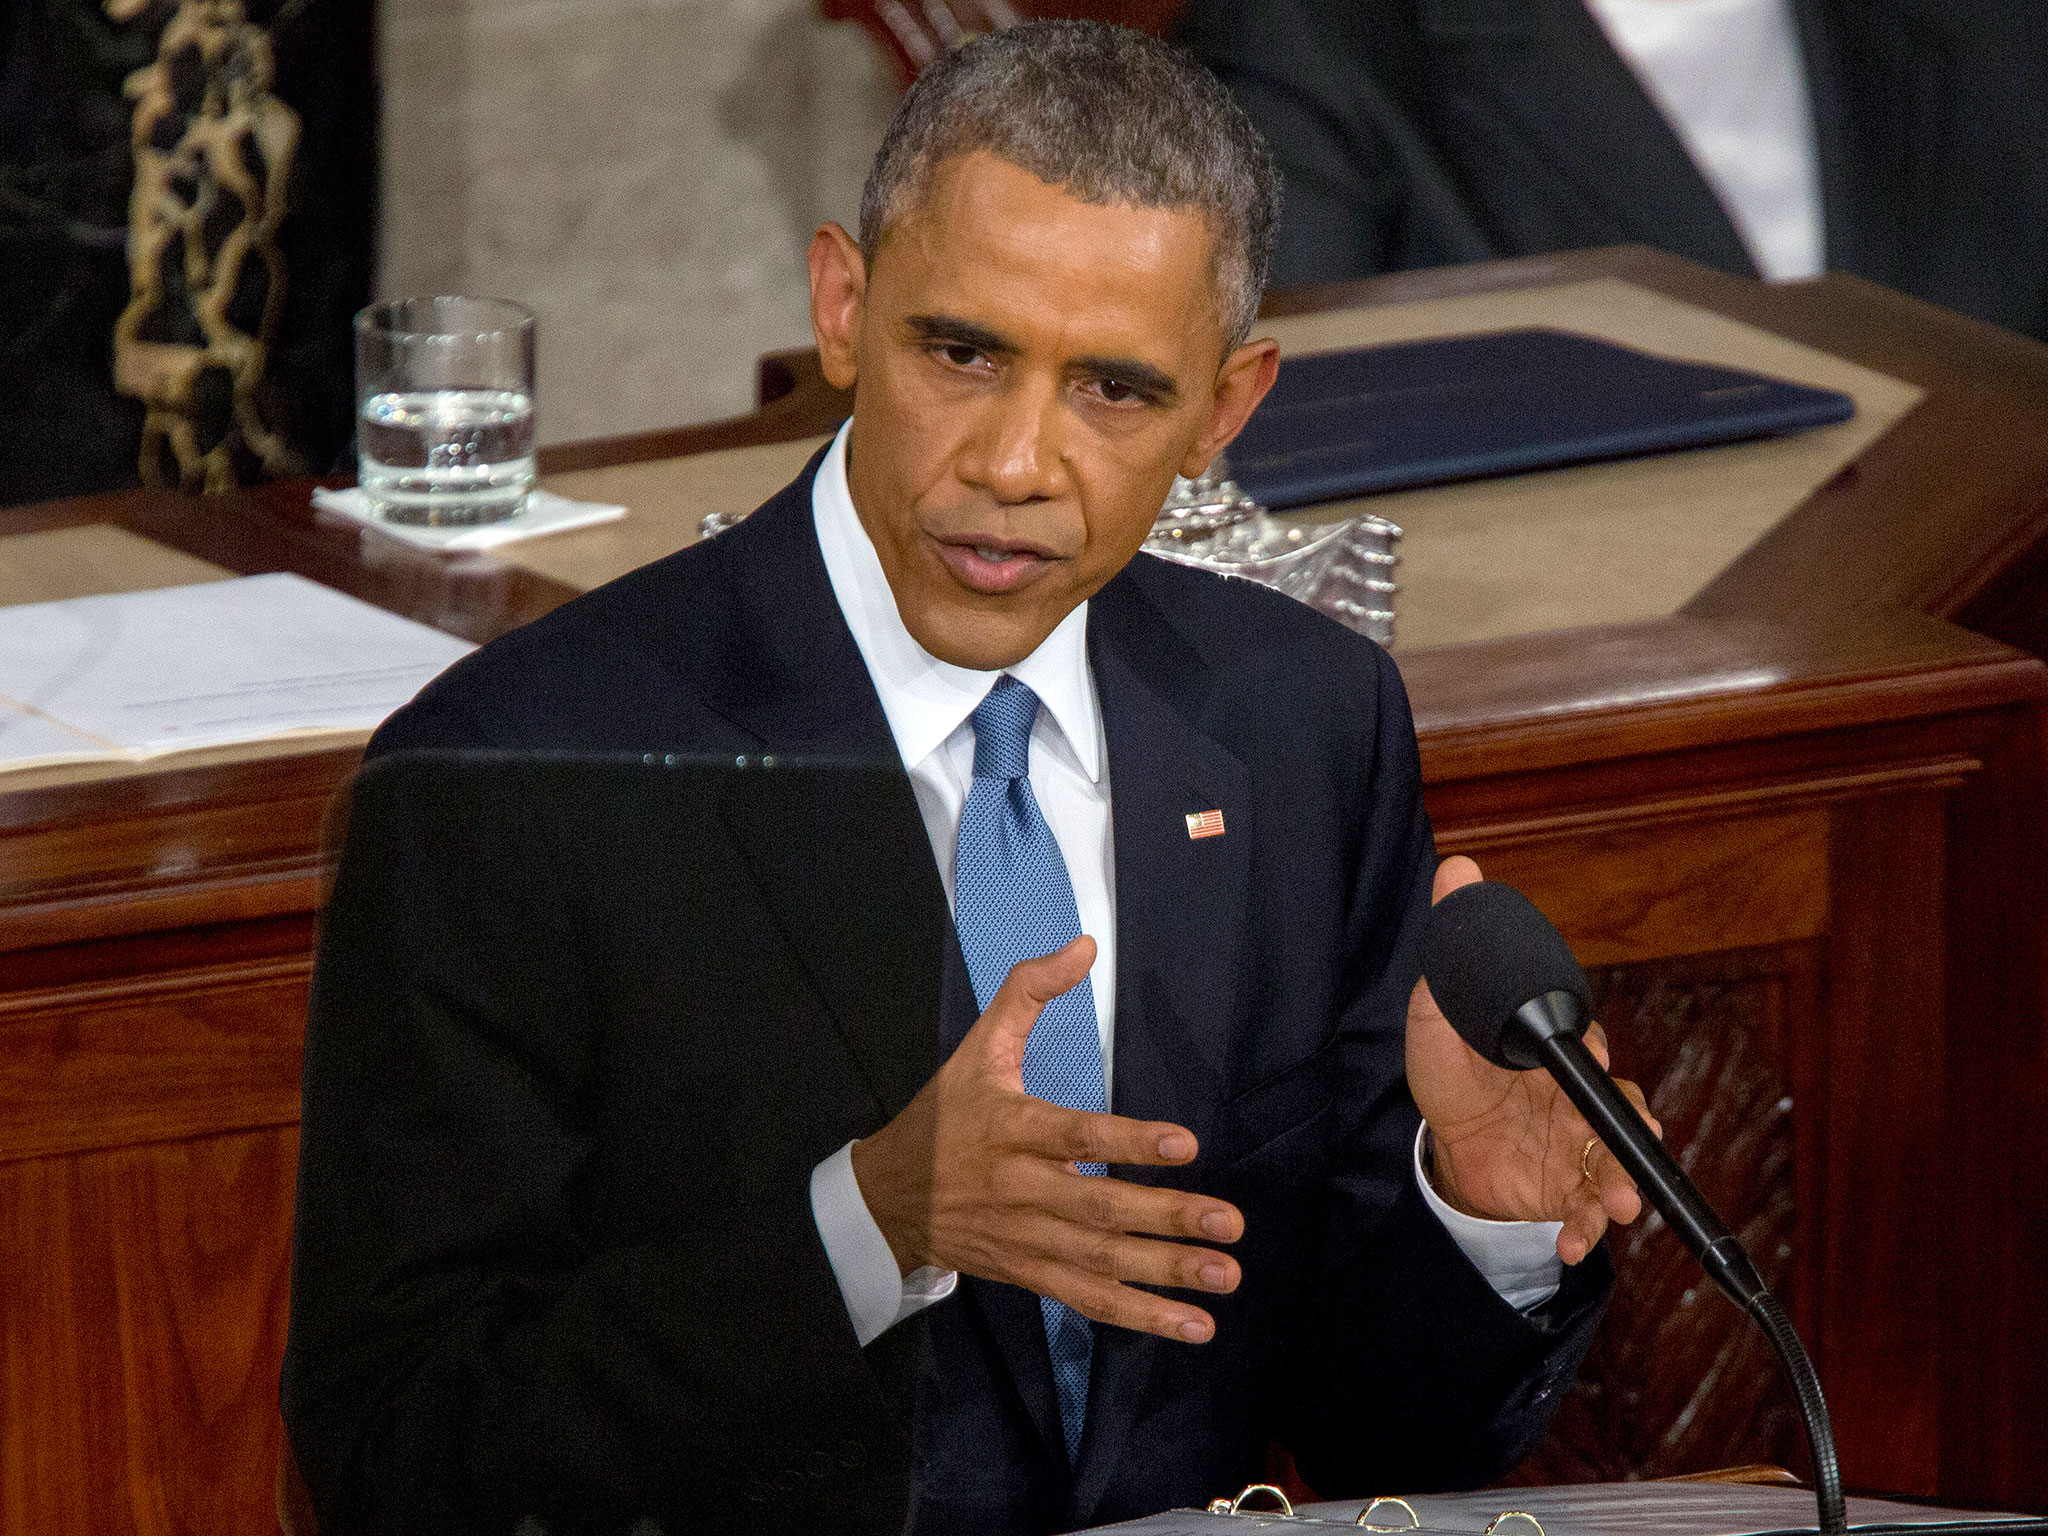 U.S. President Barack Obama discusses fiscal matters at the State of the Union address in Washington, D.C., on Jan. 20, 2015.
